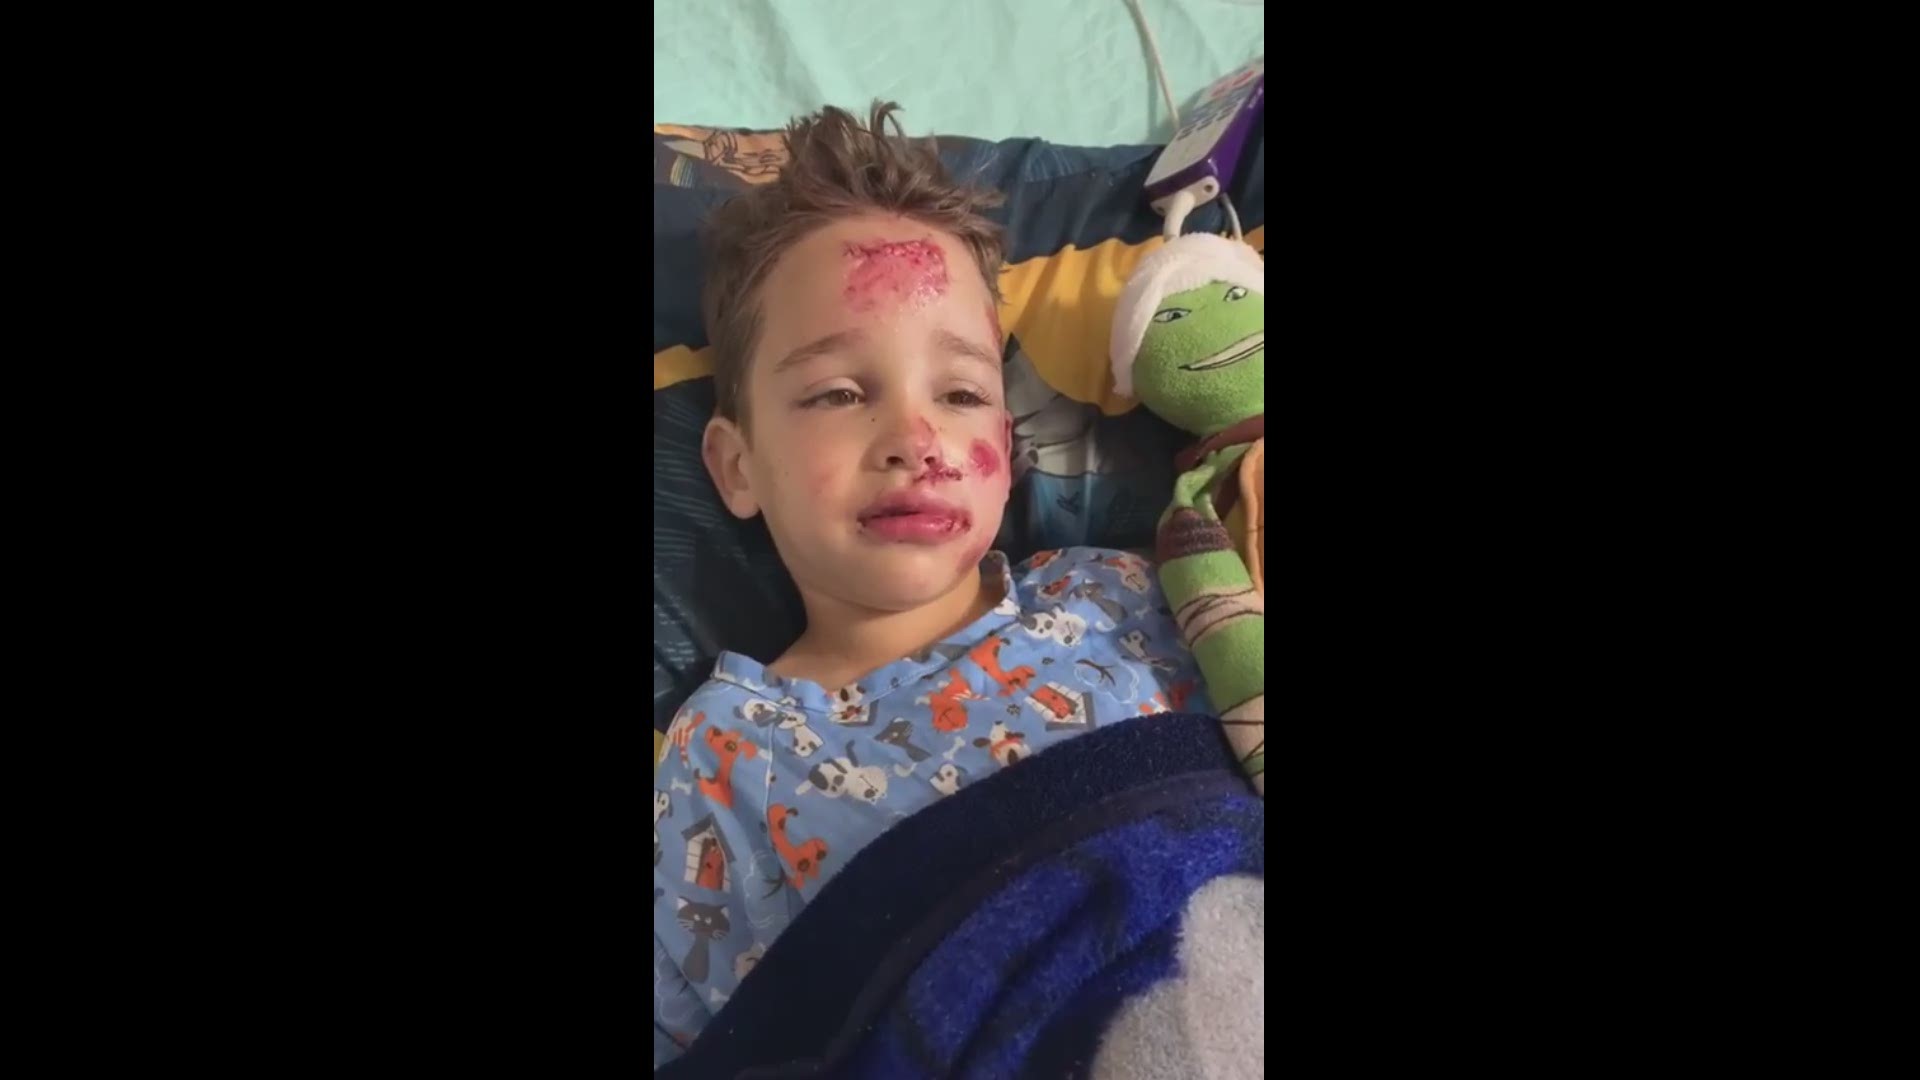 6-year-old hit by car while trick-or-treating thanks everyone for the love